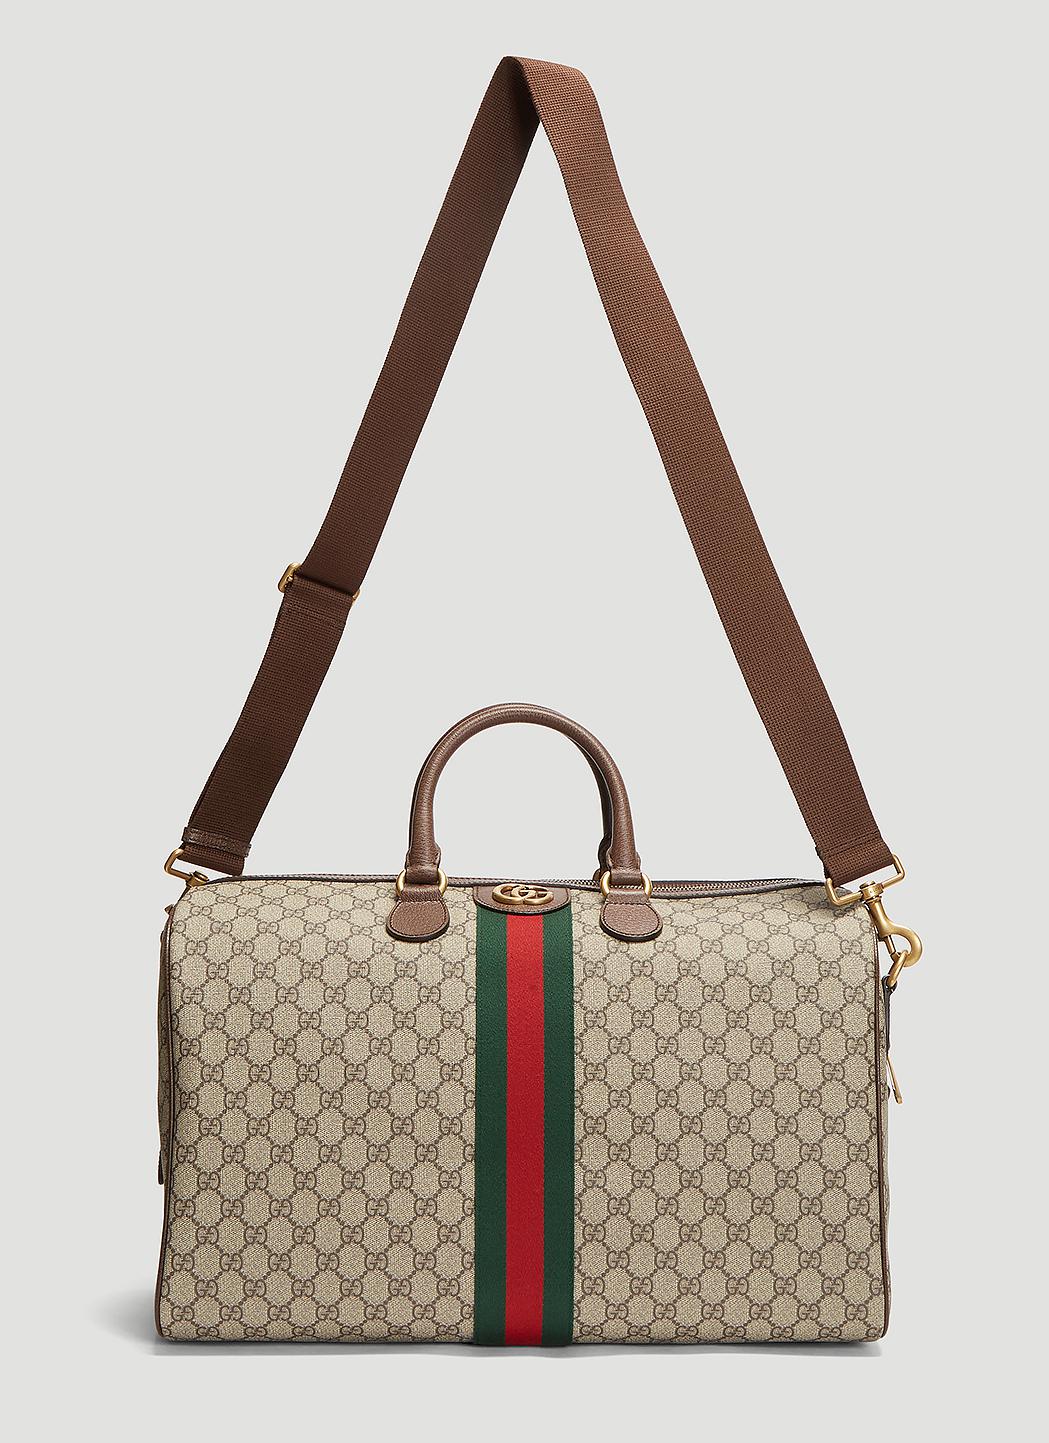 Gucci Canvas Ophidia GG Medium Carry-on Duffle Bag In Beige in Natural for Men - Lyst